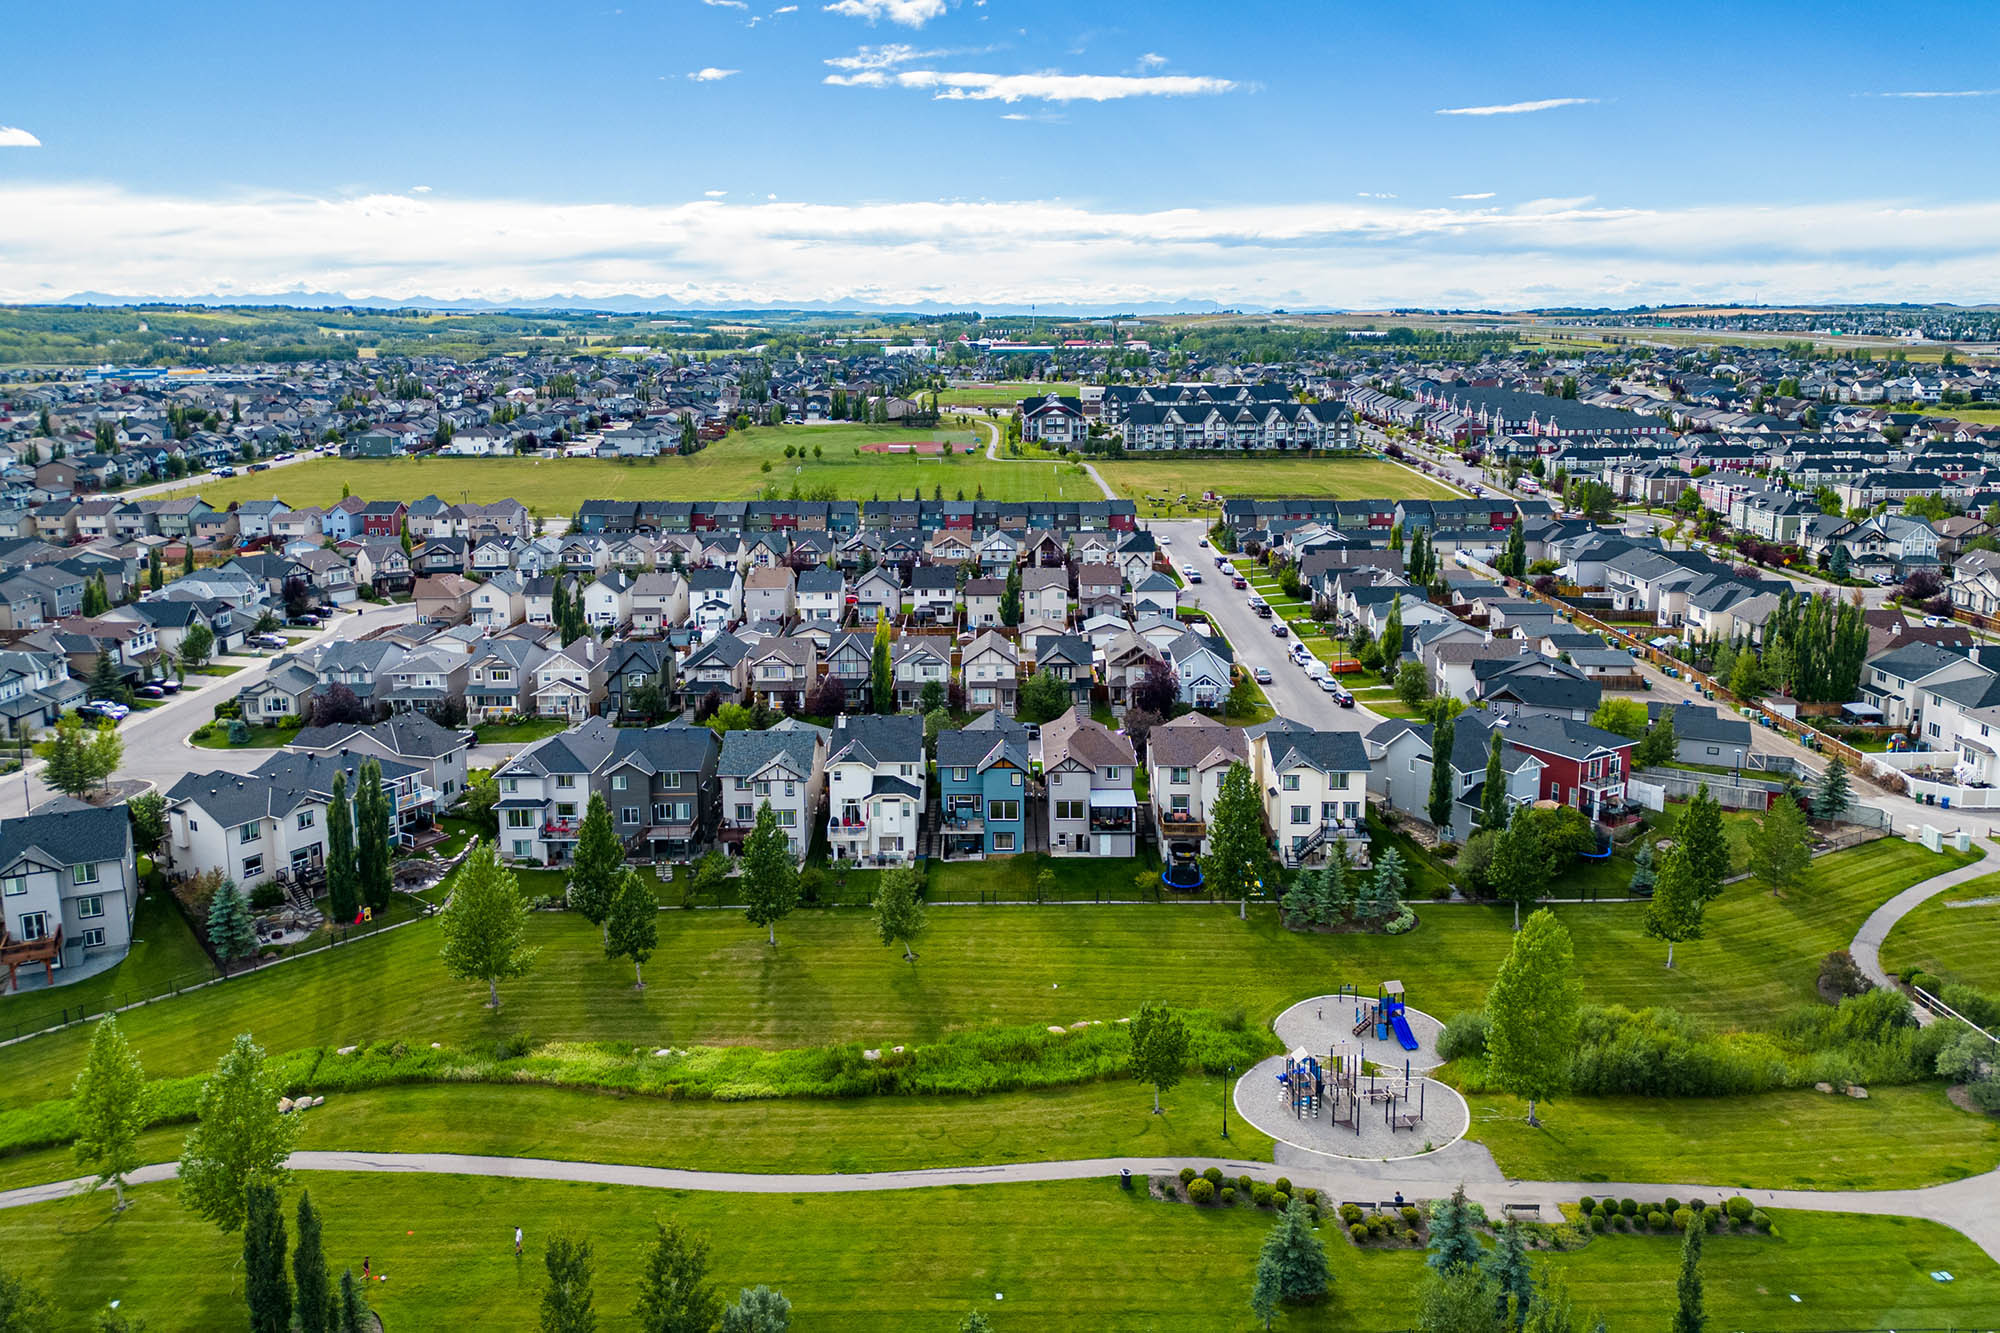 Aerial drone photograph of the Calgary Silverado community showing a playground, green space, detached homes for sale, a Silverado baseball diamond, Turner Field - a sports field, and the Rocky Mountains in the distance.